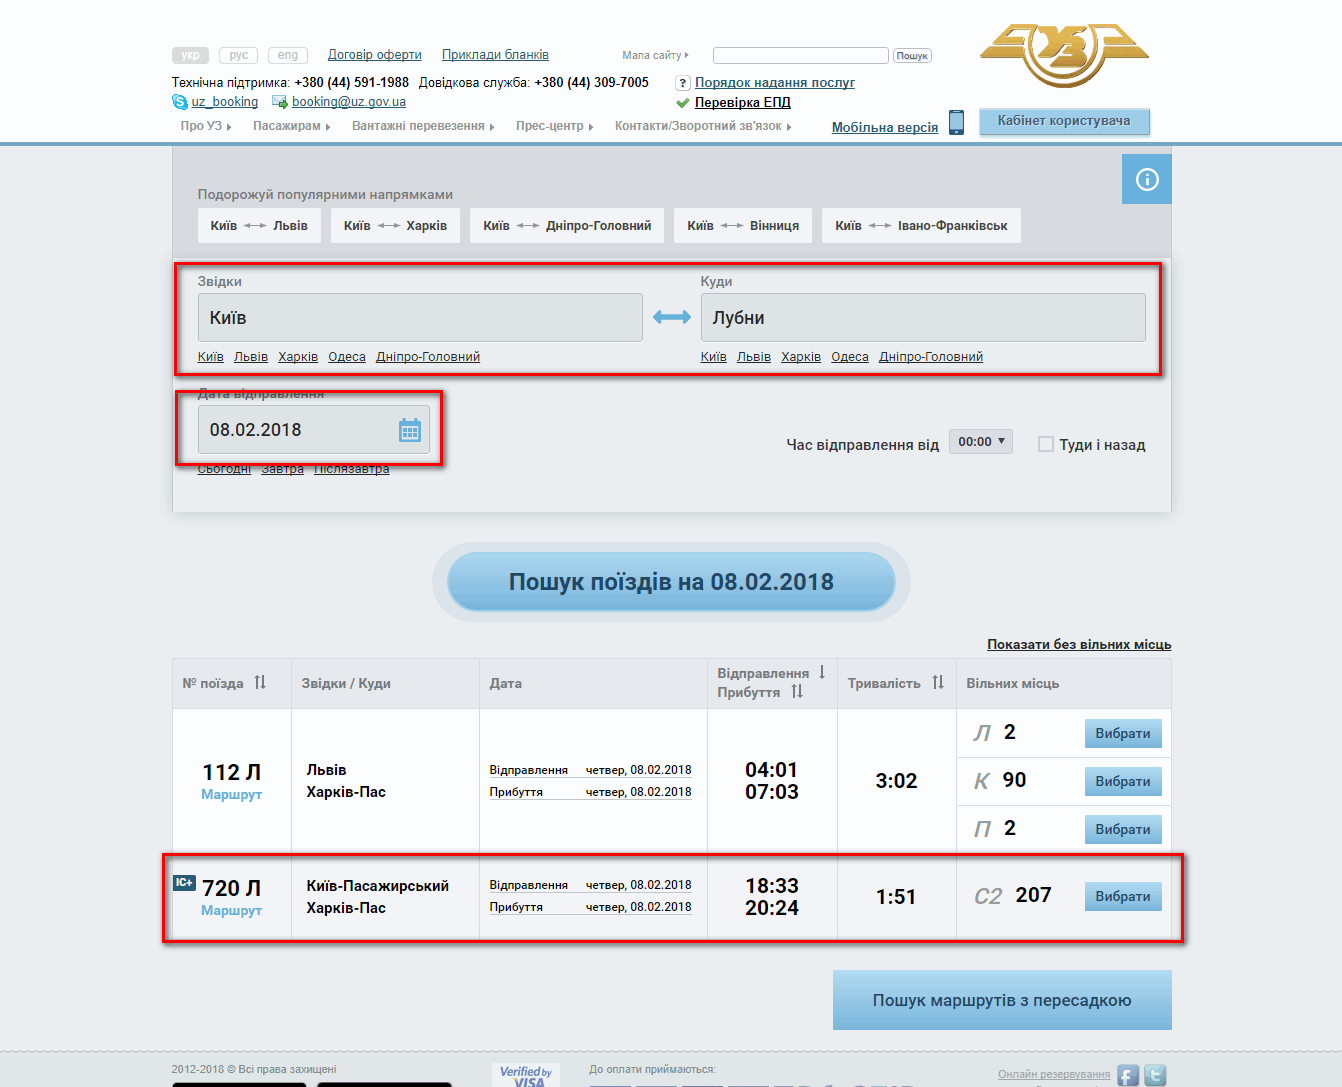 https://booking.uz.gov.ua/?from=2200001&to=2204560&date=2018-02-08&time=00%3A00&another_ec=0&url=train-list